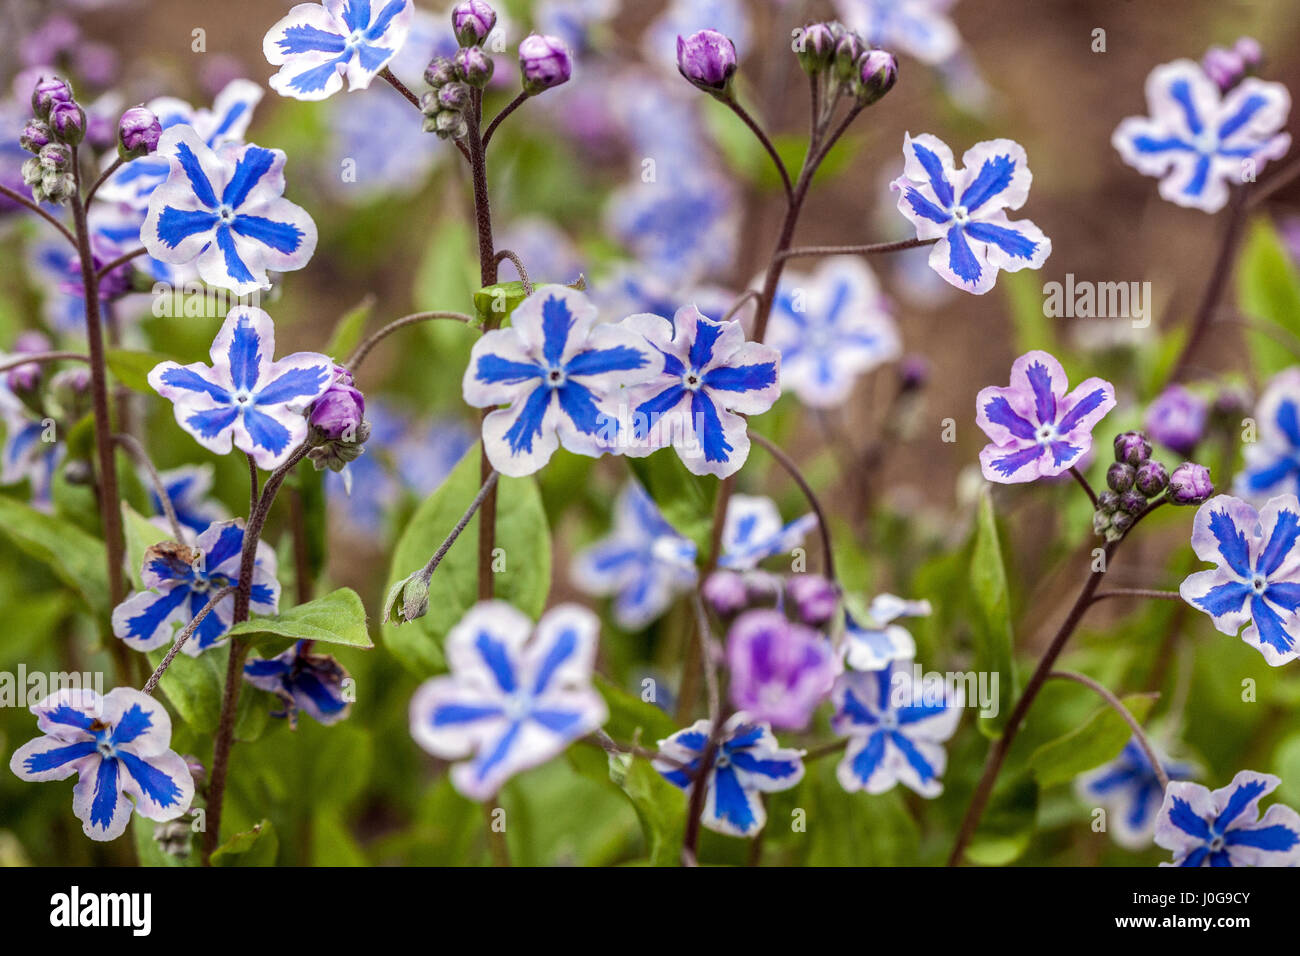 Omphalodes cappadocica 'Starry Eyes' know as Cappadocian navelwort in bloom Stock Photo